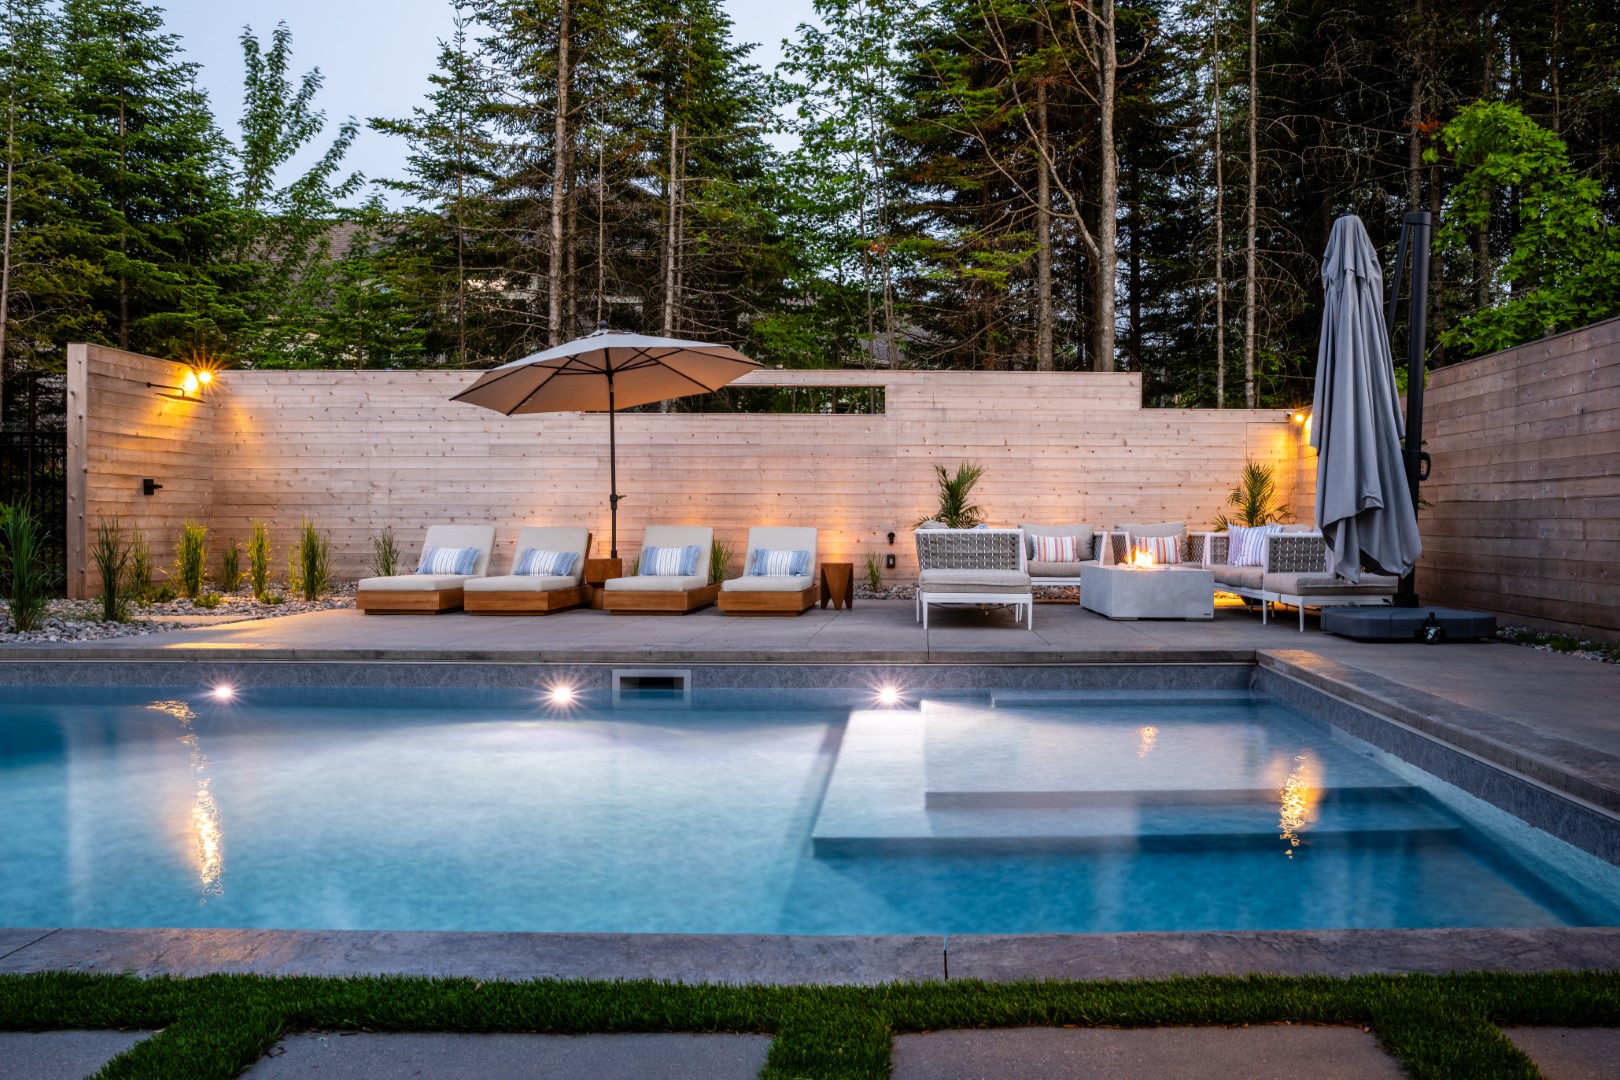 Seating area next to pool with tanning ledge and underwater lighting in Moncton home